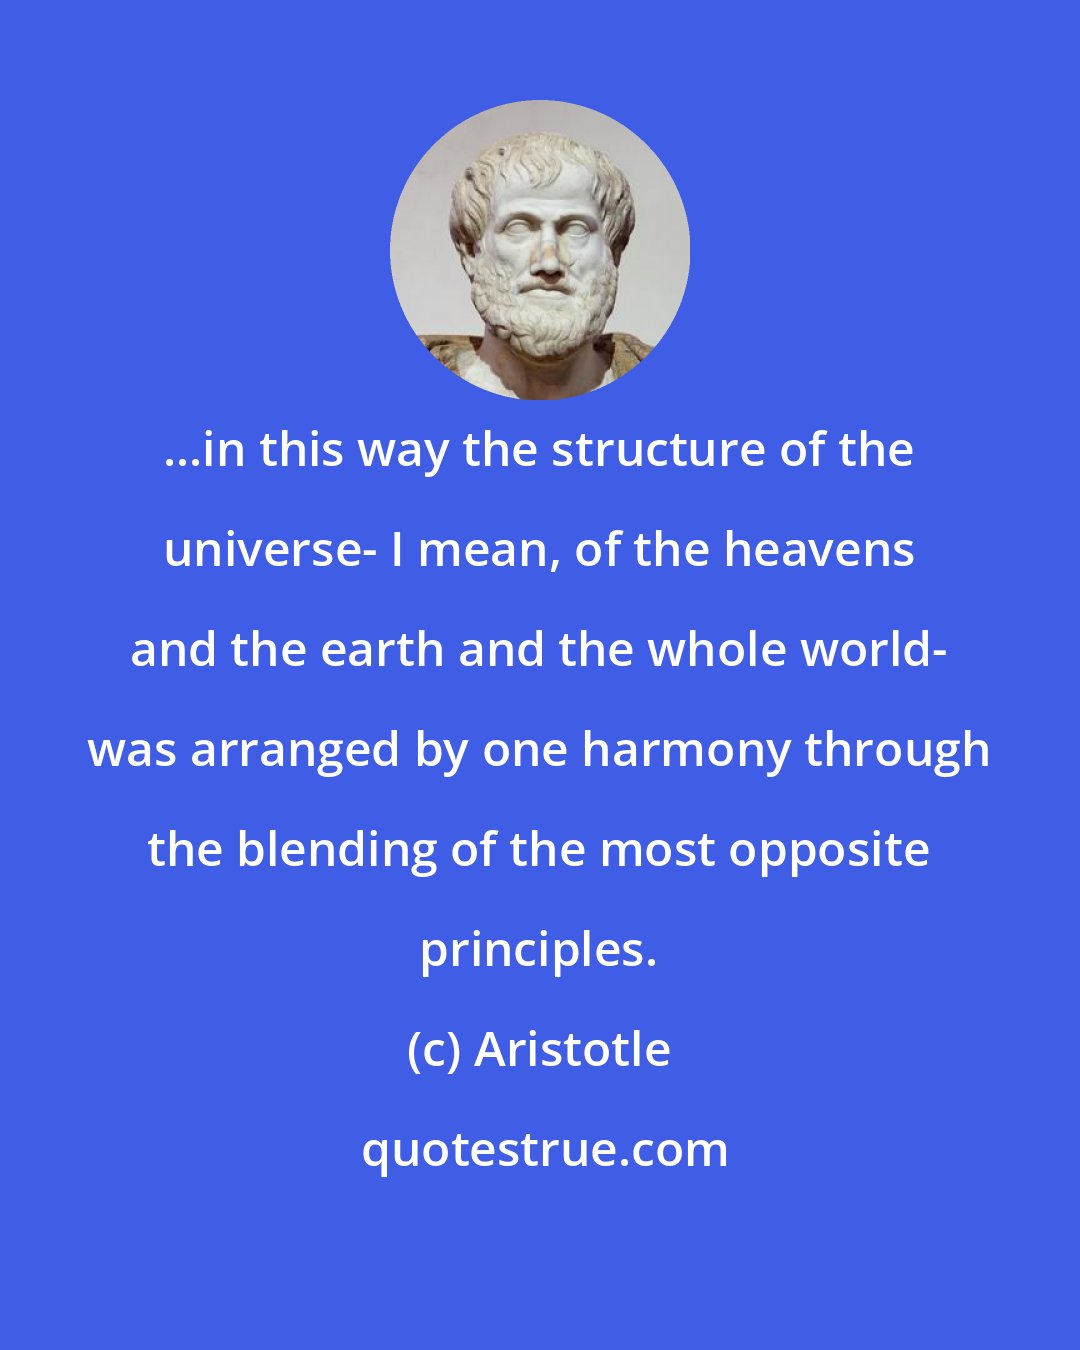 Aristotle: ...in this way the structure of the universe- I mean, of the heavens and the earth and the whole world- was arranged by one harmony through the blending of the most opposite principles.